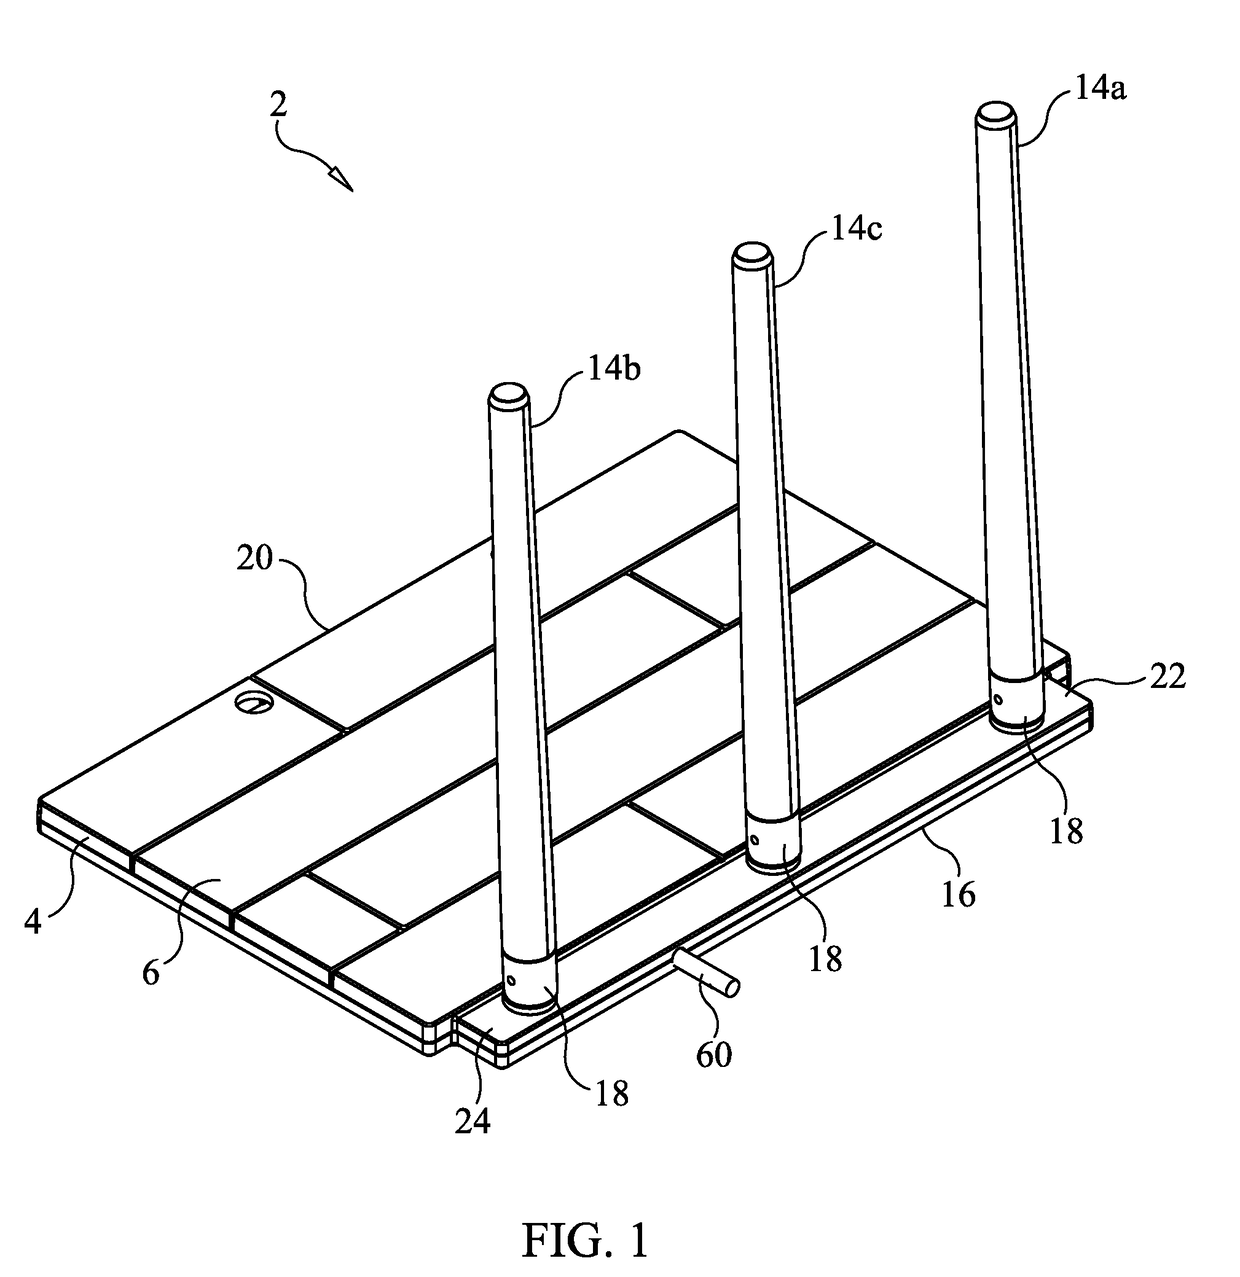 Omni-directional television antenna with WIFI reception capability